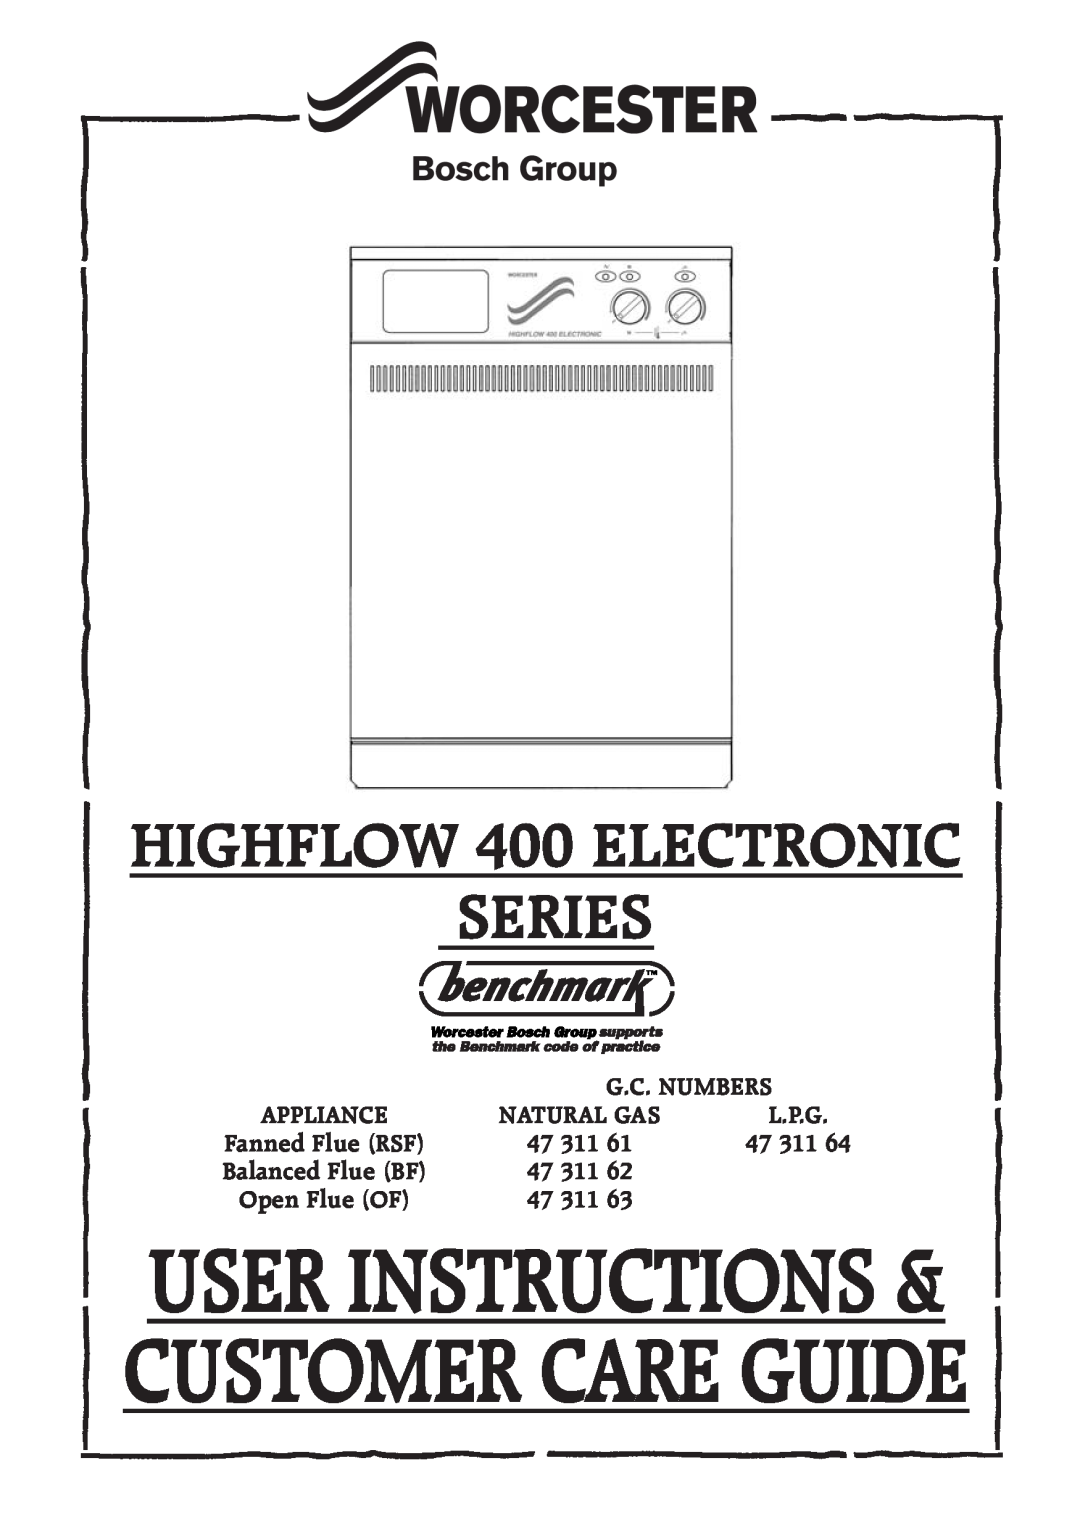 Compex Technologies manual Series, User Instructions & Customer Care Guide, HIGHFLOW 400 ELECTRONIC, G.C. Numbers 